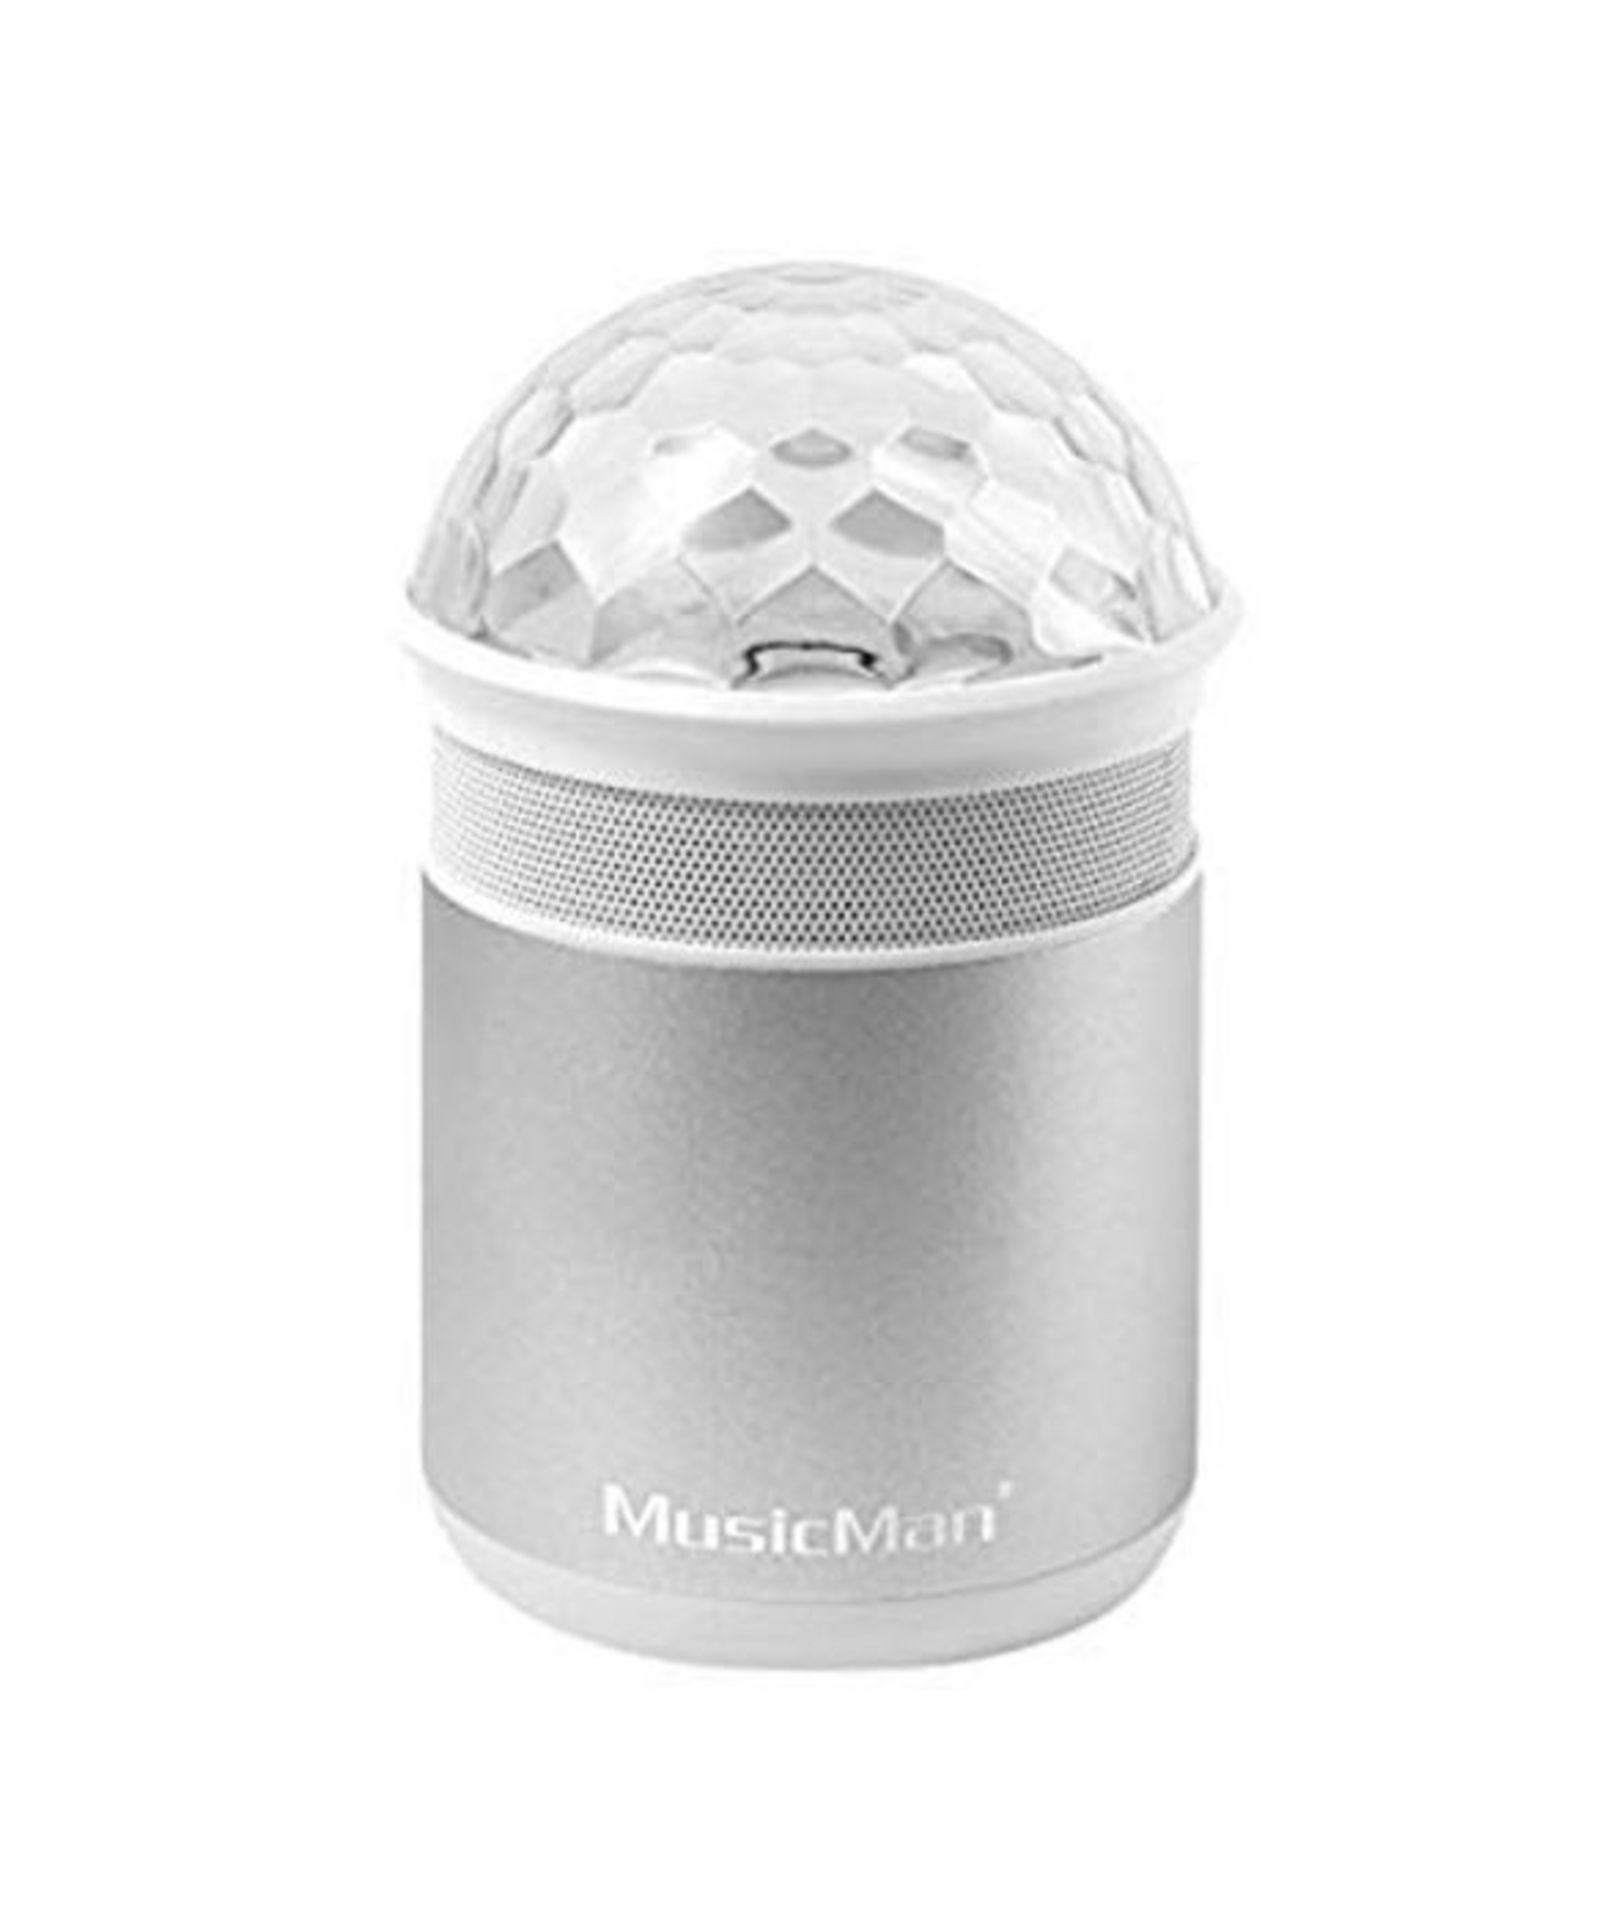 MusicMan BT-X17 Portable Wireless Disco Speaker with Bluetooth - Silver - Image 2 of 4